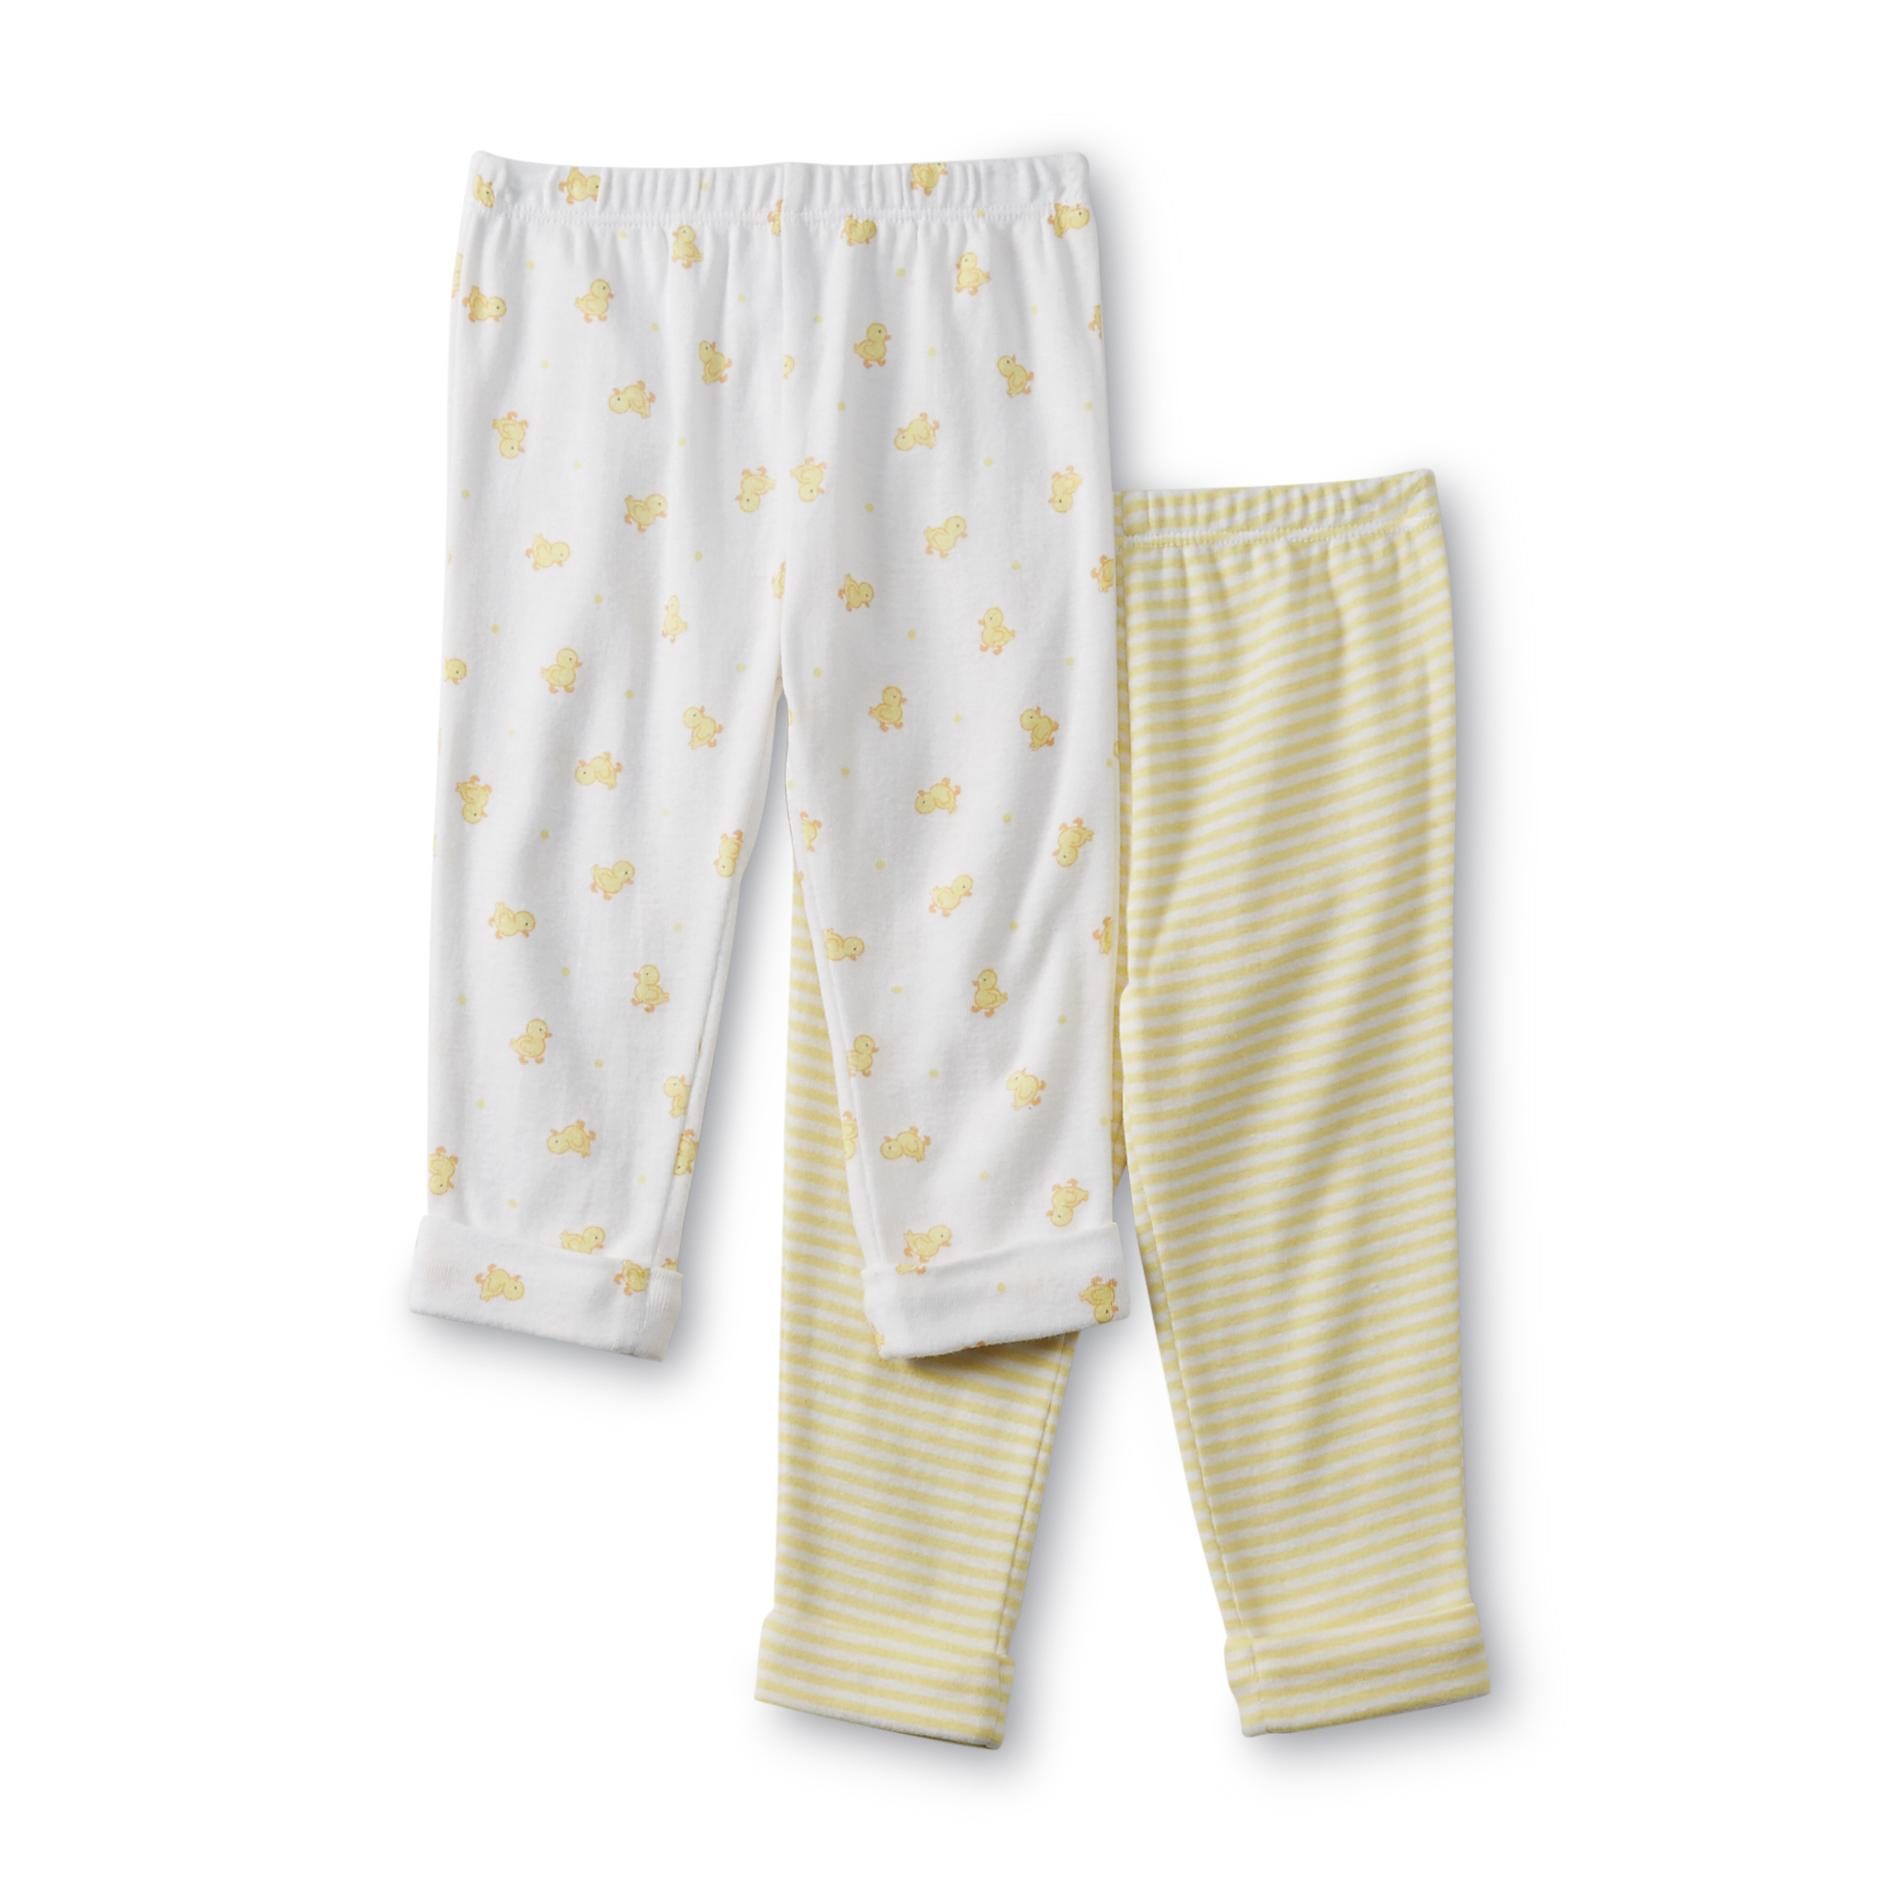 Welcome to the World Newborn 2-Pack Knit Pants - Duck